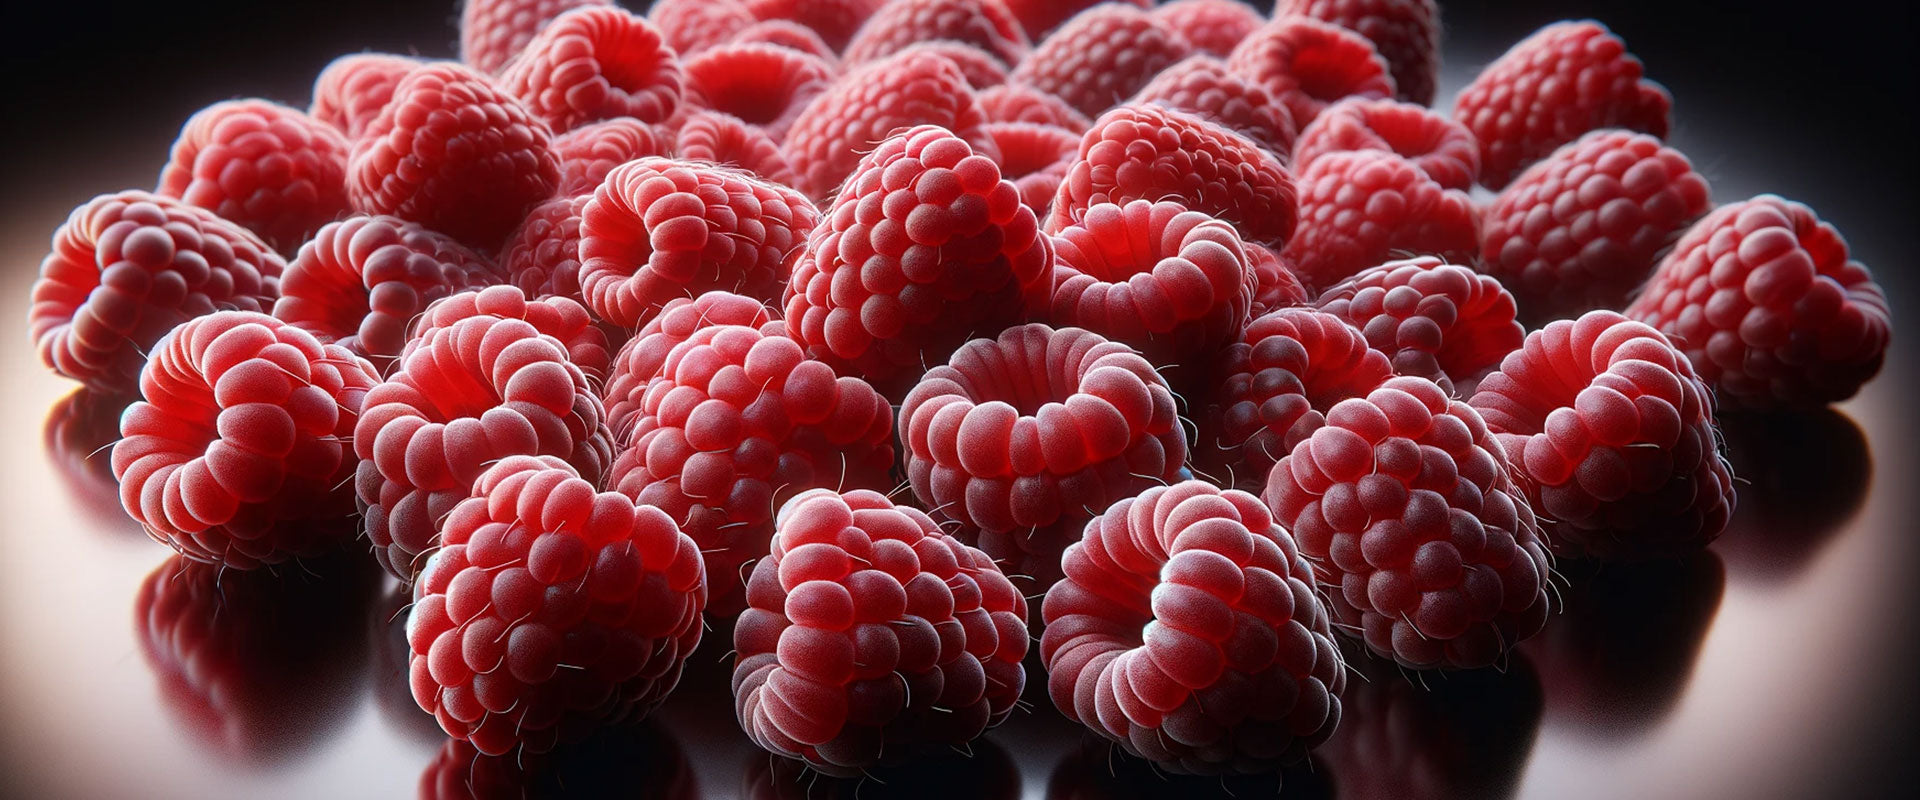 red raspberries for natural red food coloring